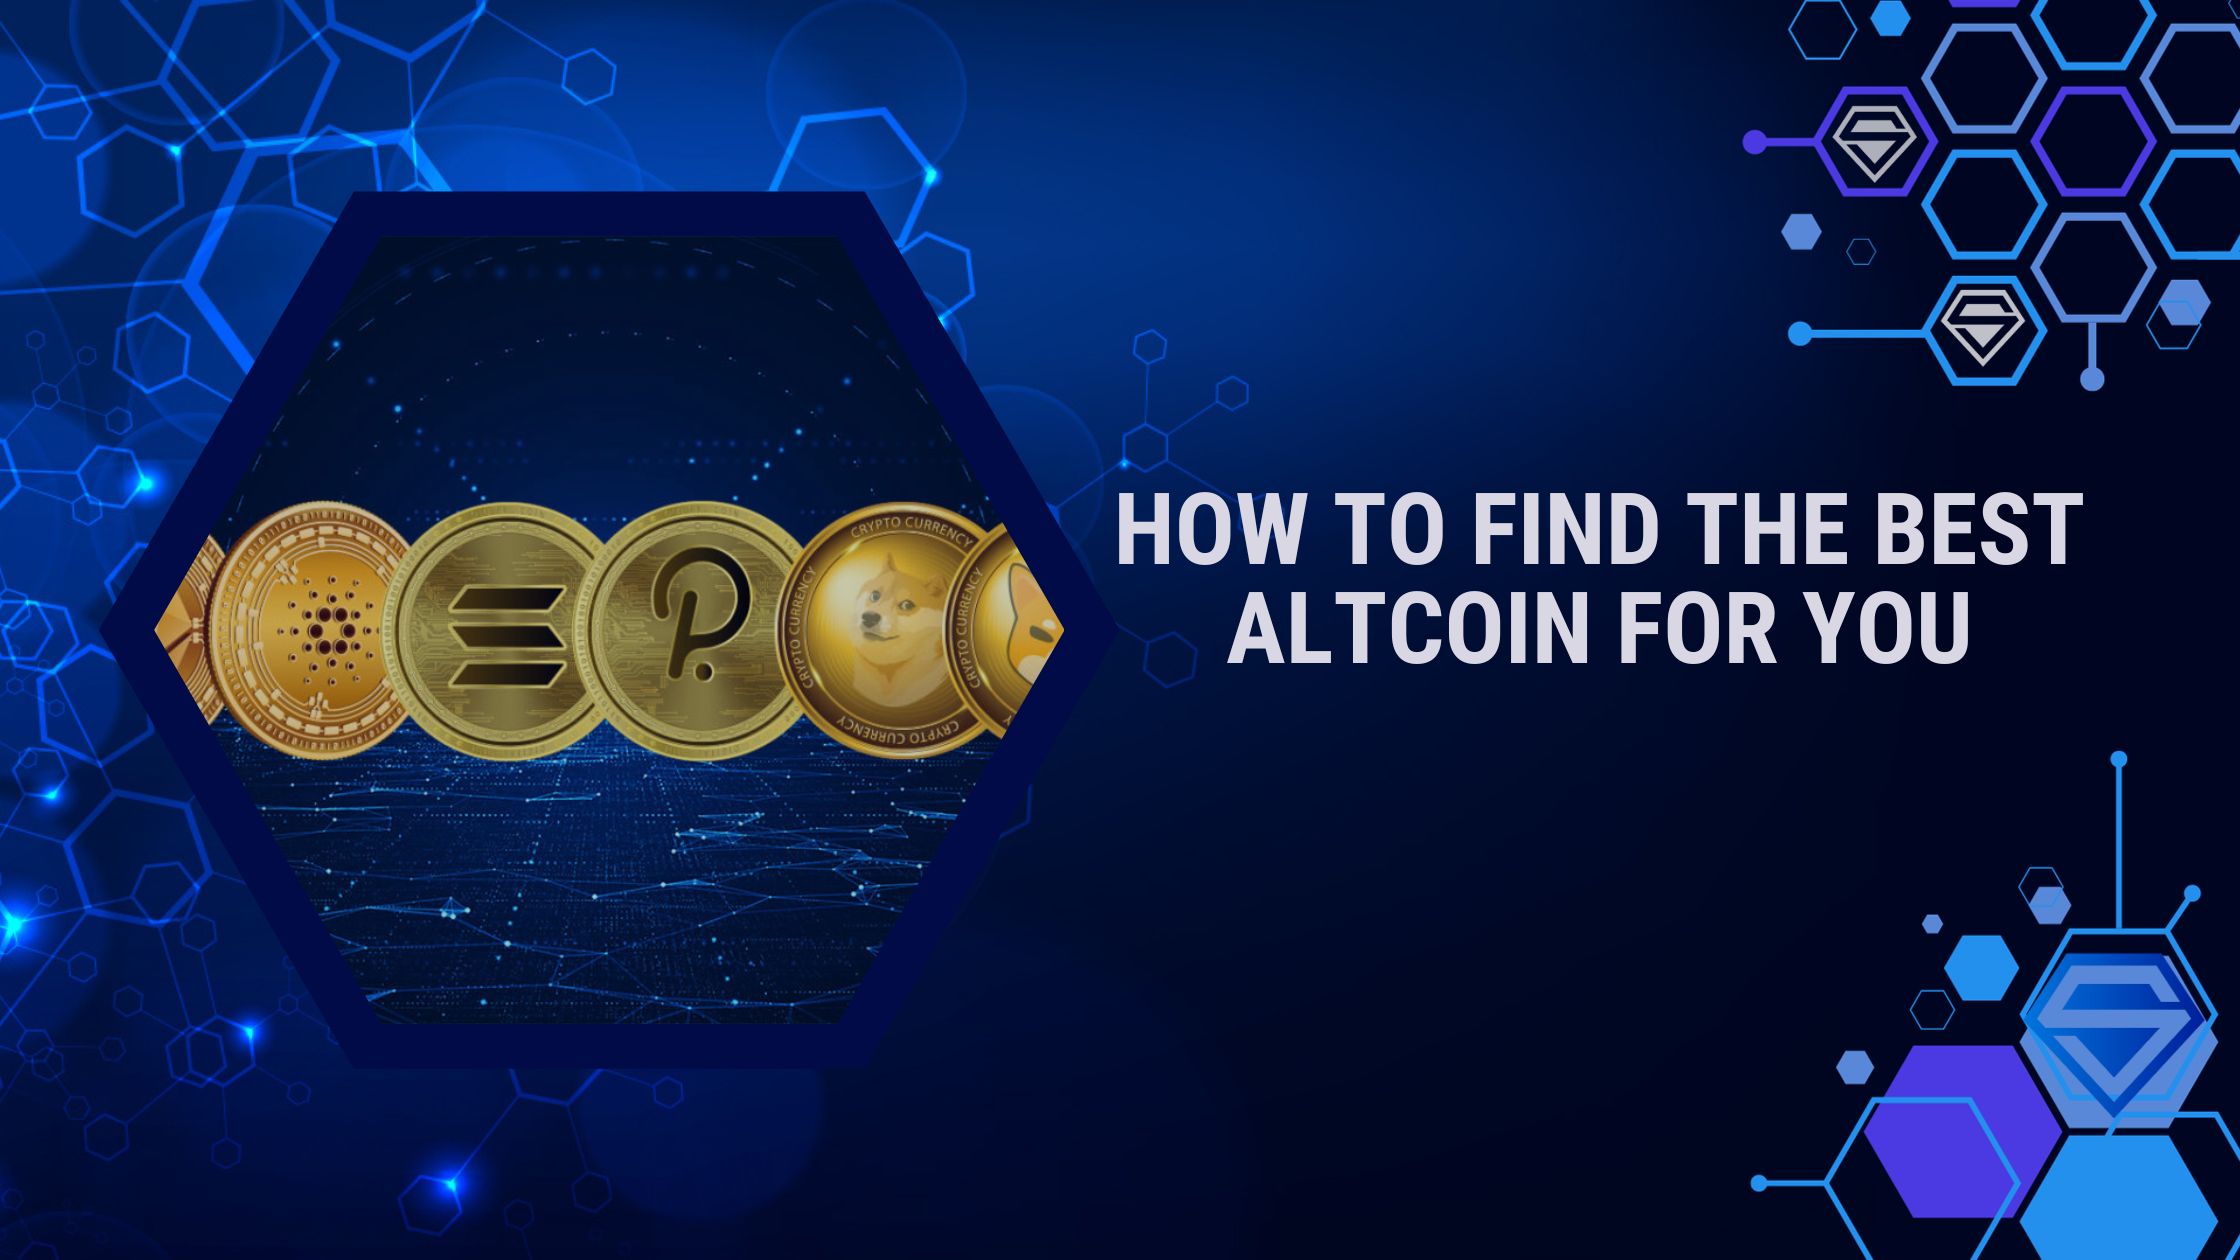 How To Find the Best Altcoin For You